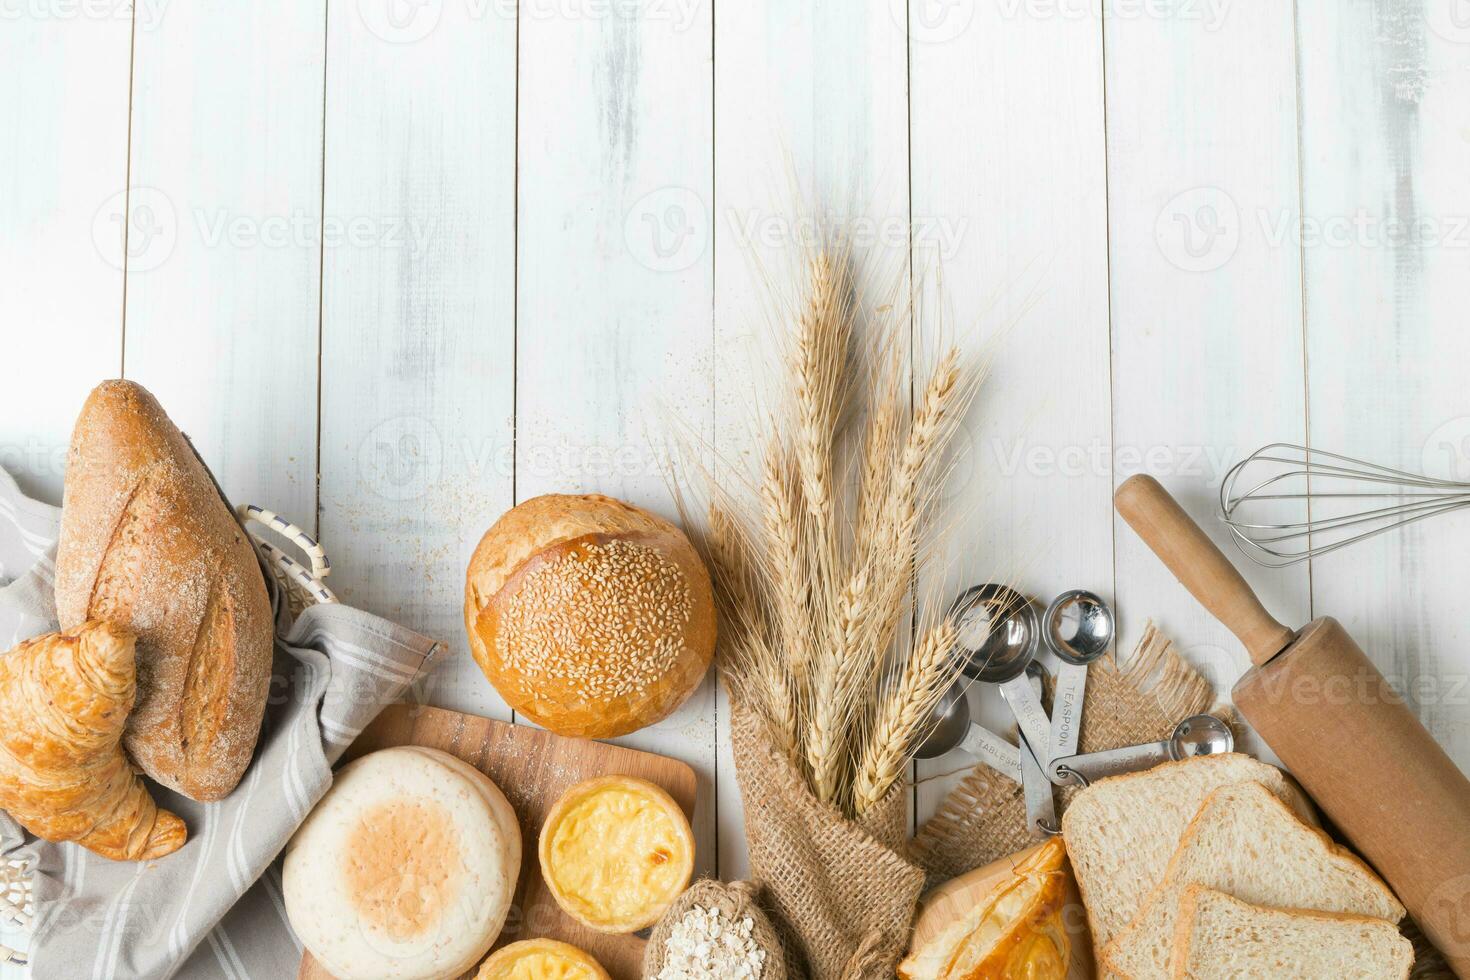 mix bread and bakery on white wood background photo